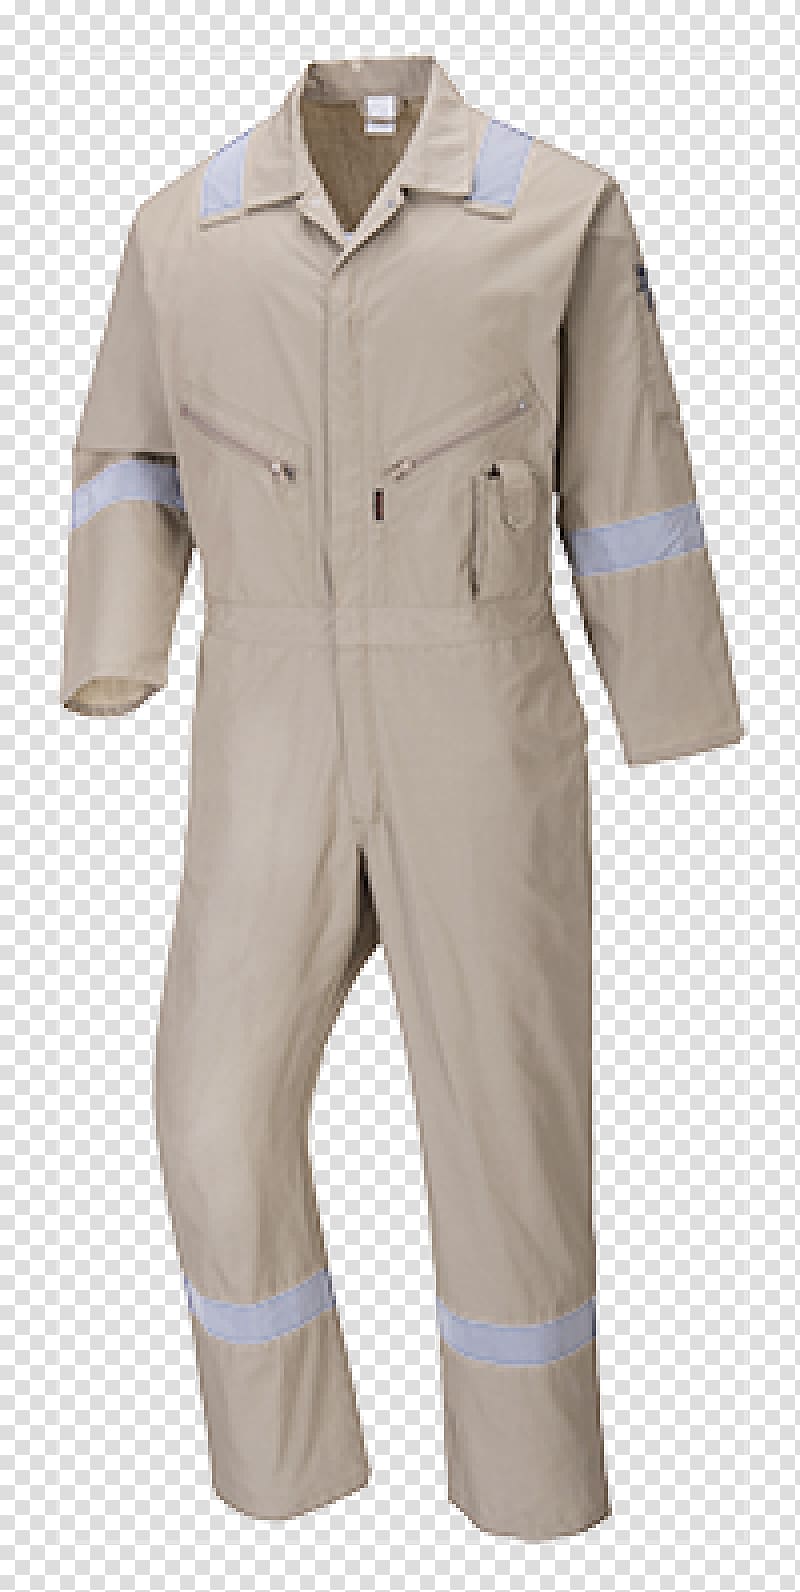 Workwear Boilersuit Overall Pants Clothing, polo shirt transparent ...